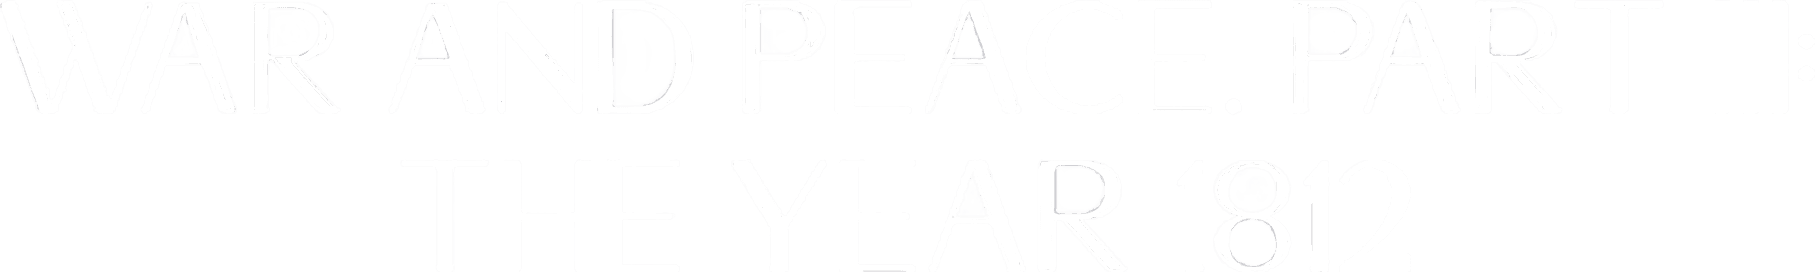 War and Peace, Part III: The Year 1812 logo